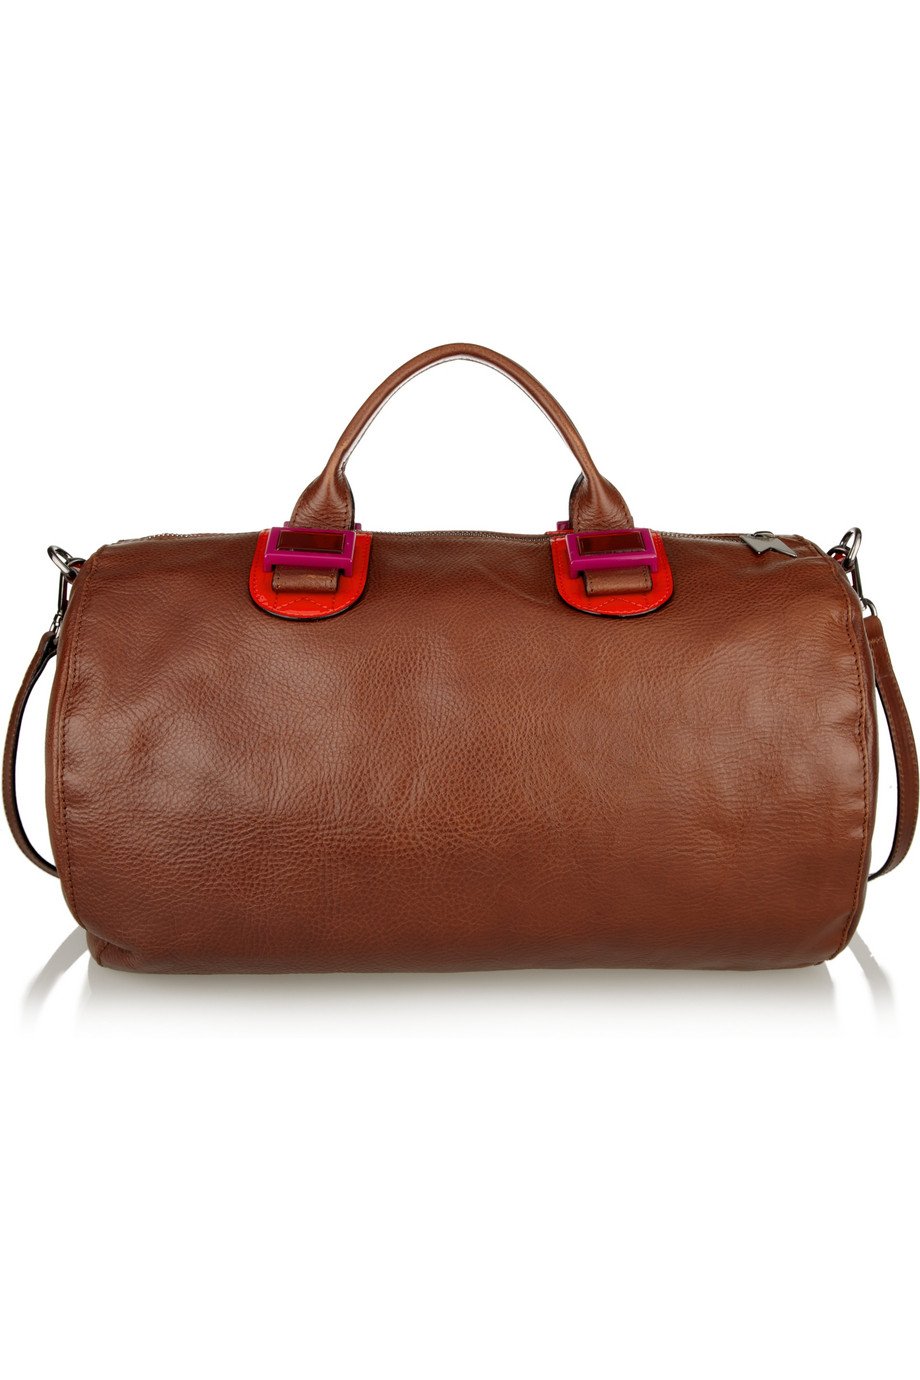 Meredith Wendell Leather Duffel Bag in Brown - Lyst